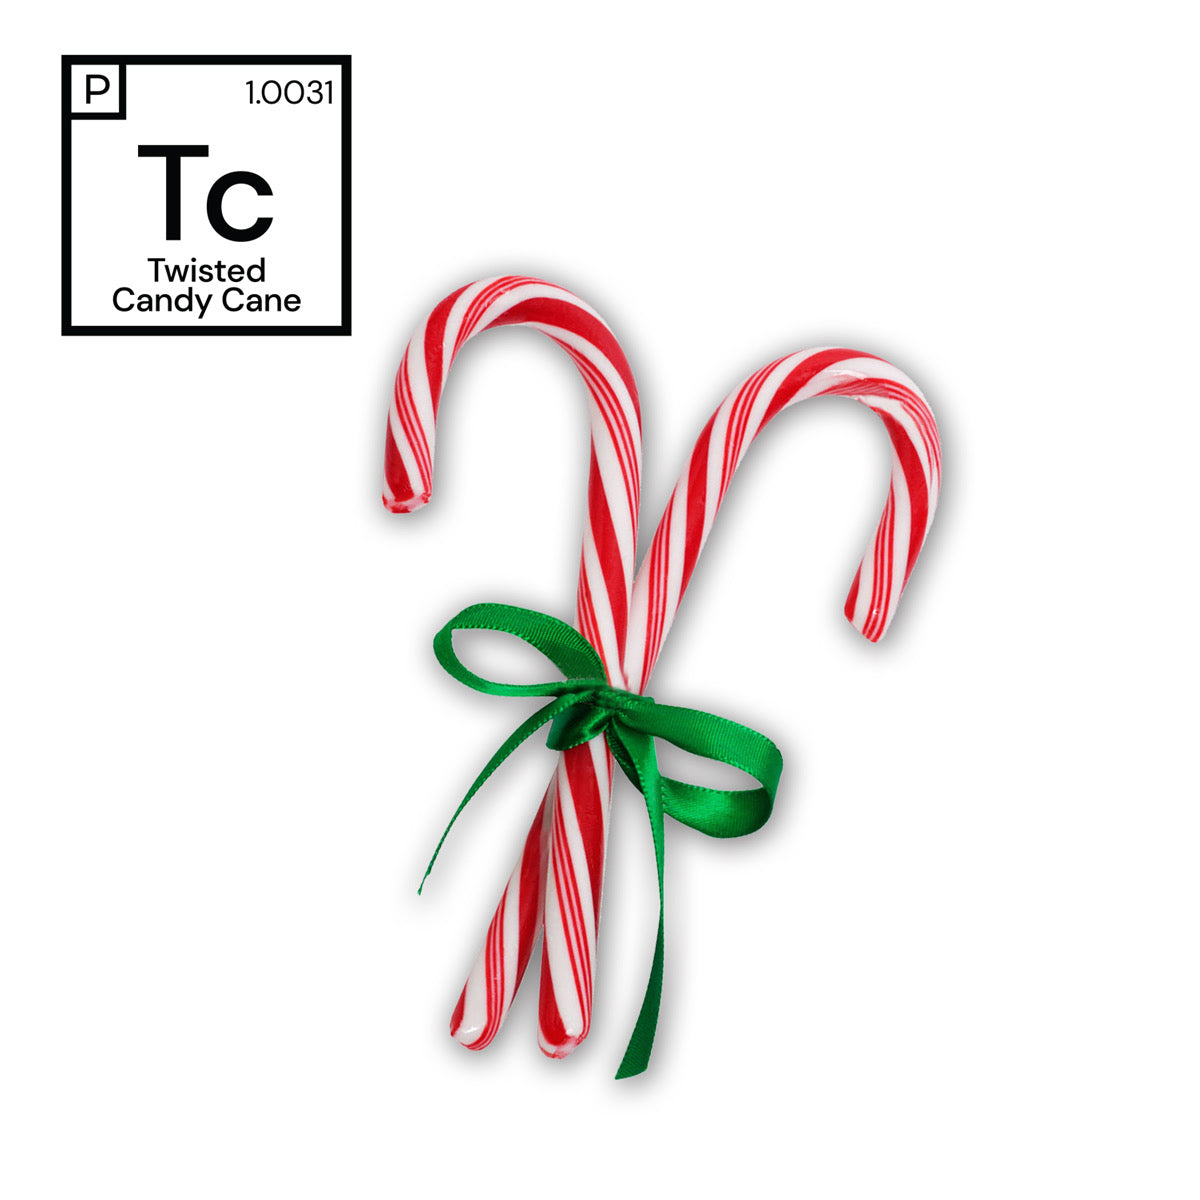 Twisted Candy Cane Fragrance #1.0031